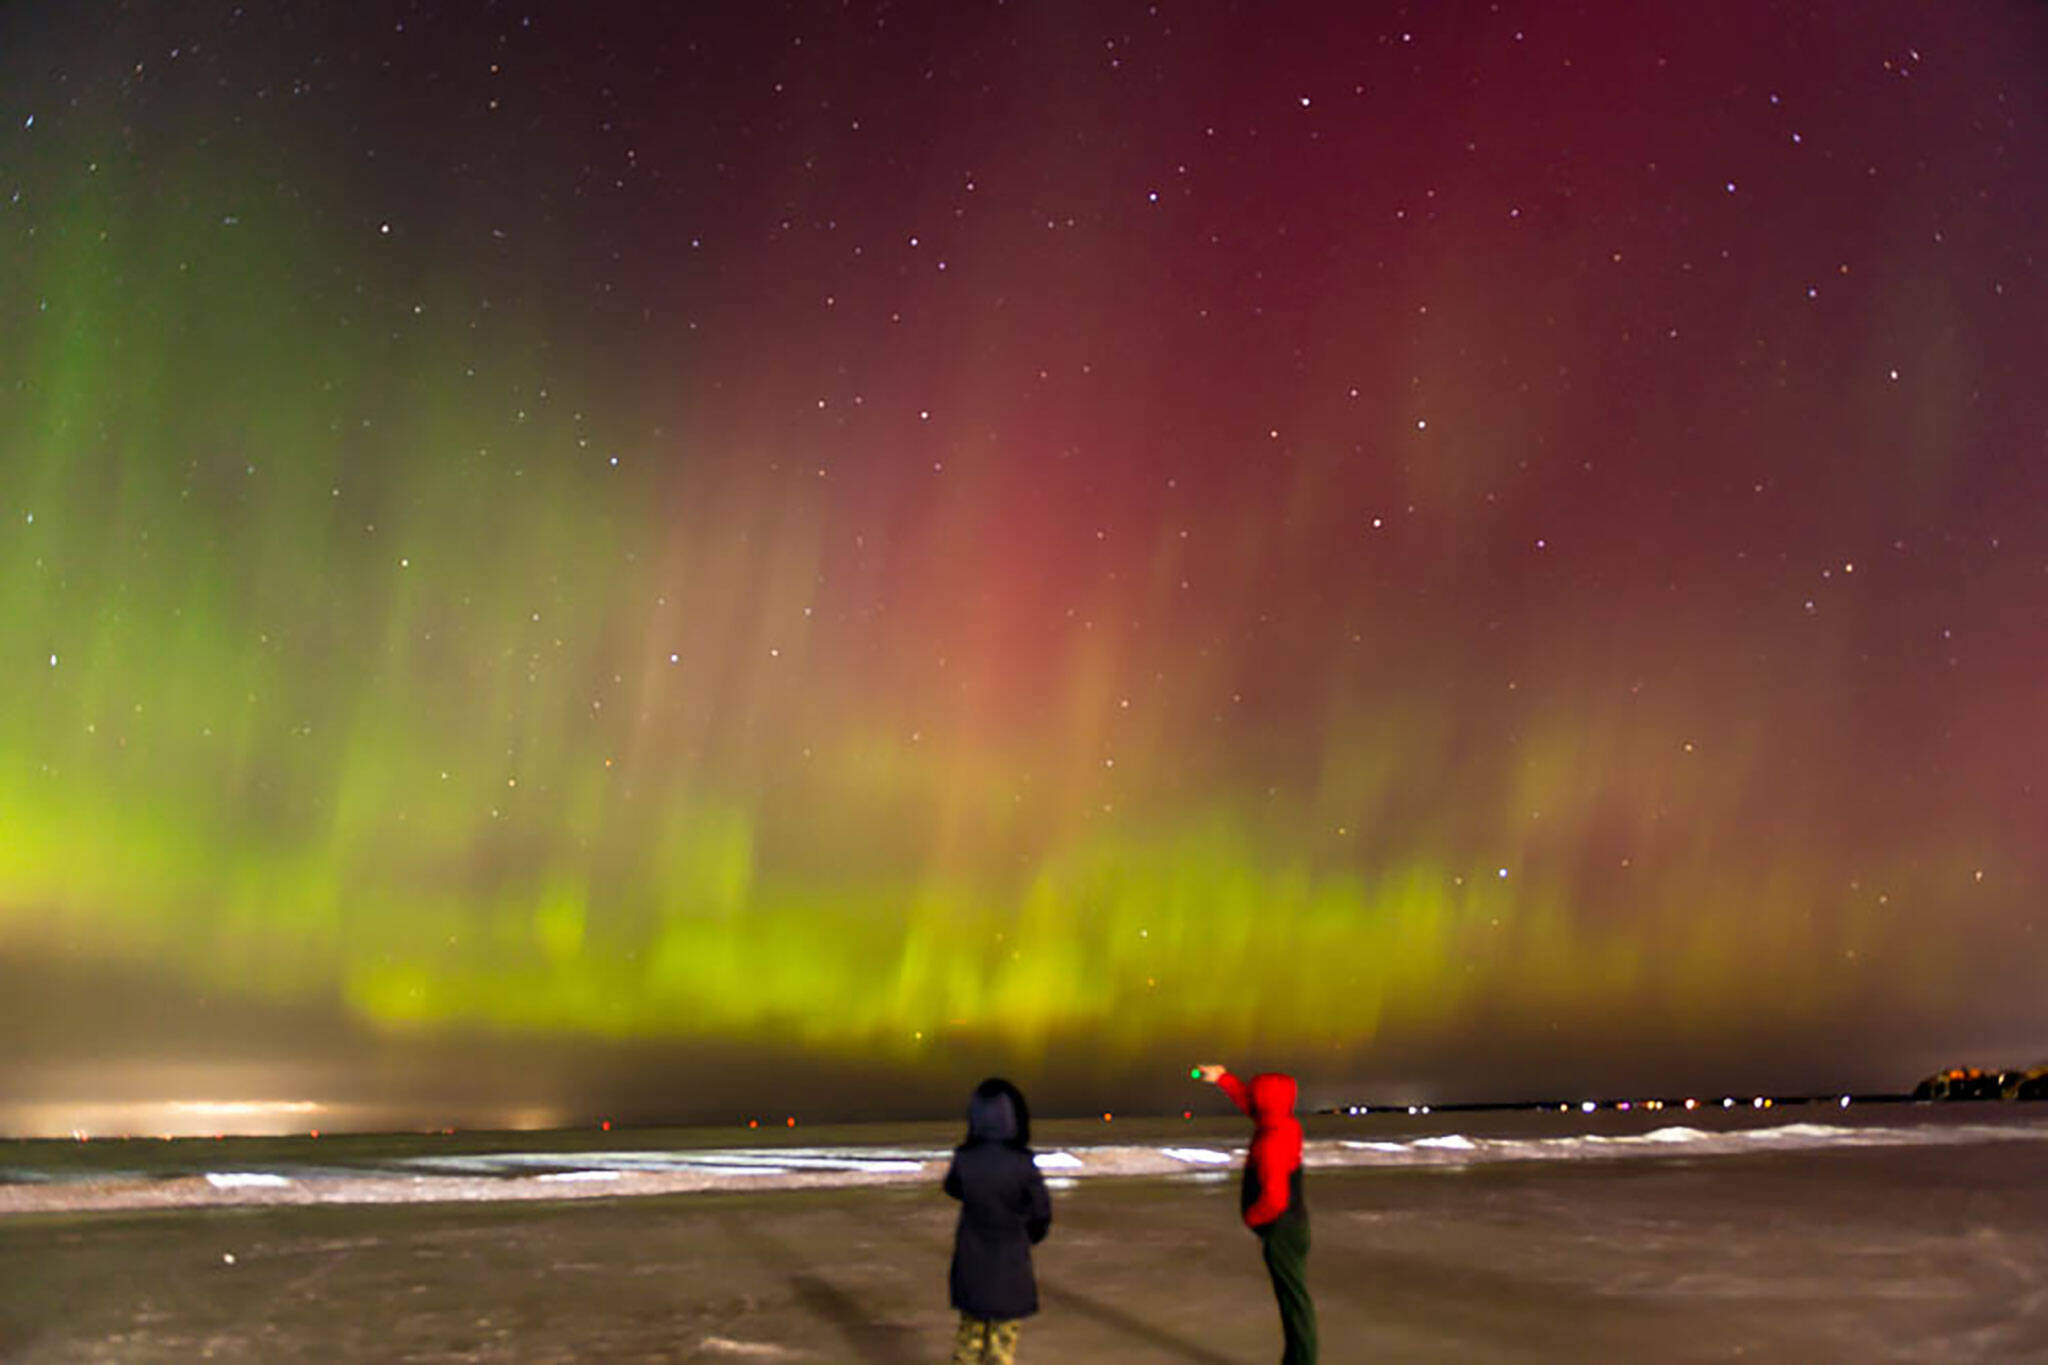 Northern Lights just appeared over Ontario and the photos are